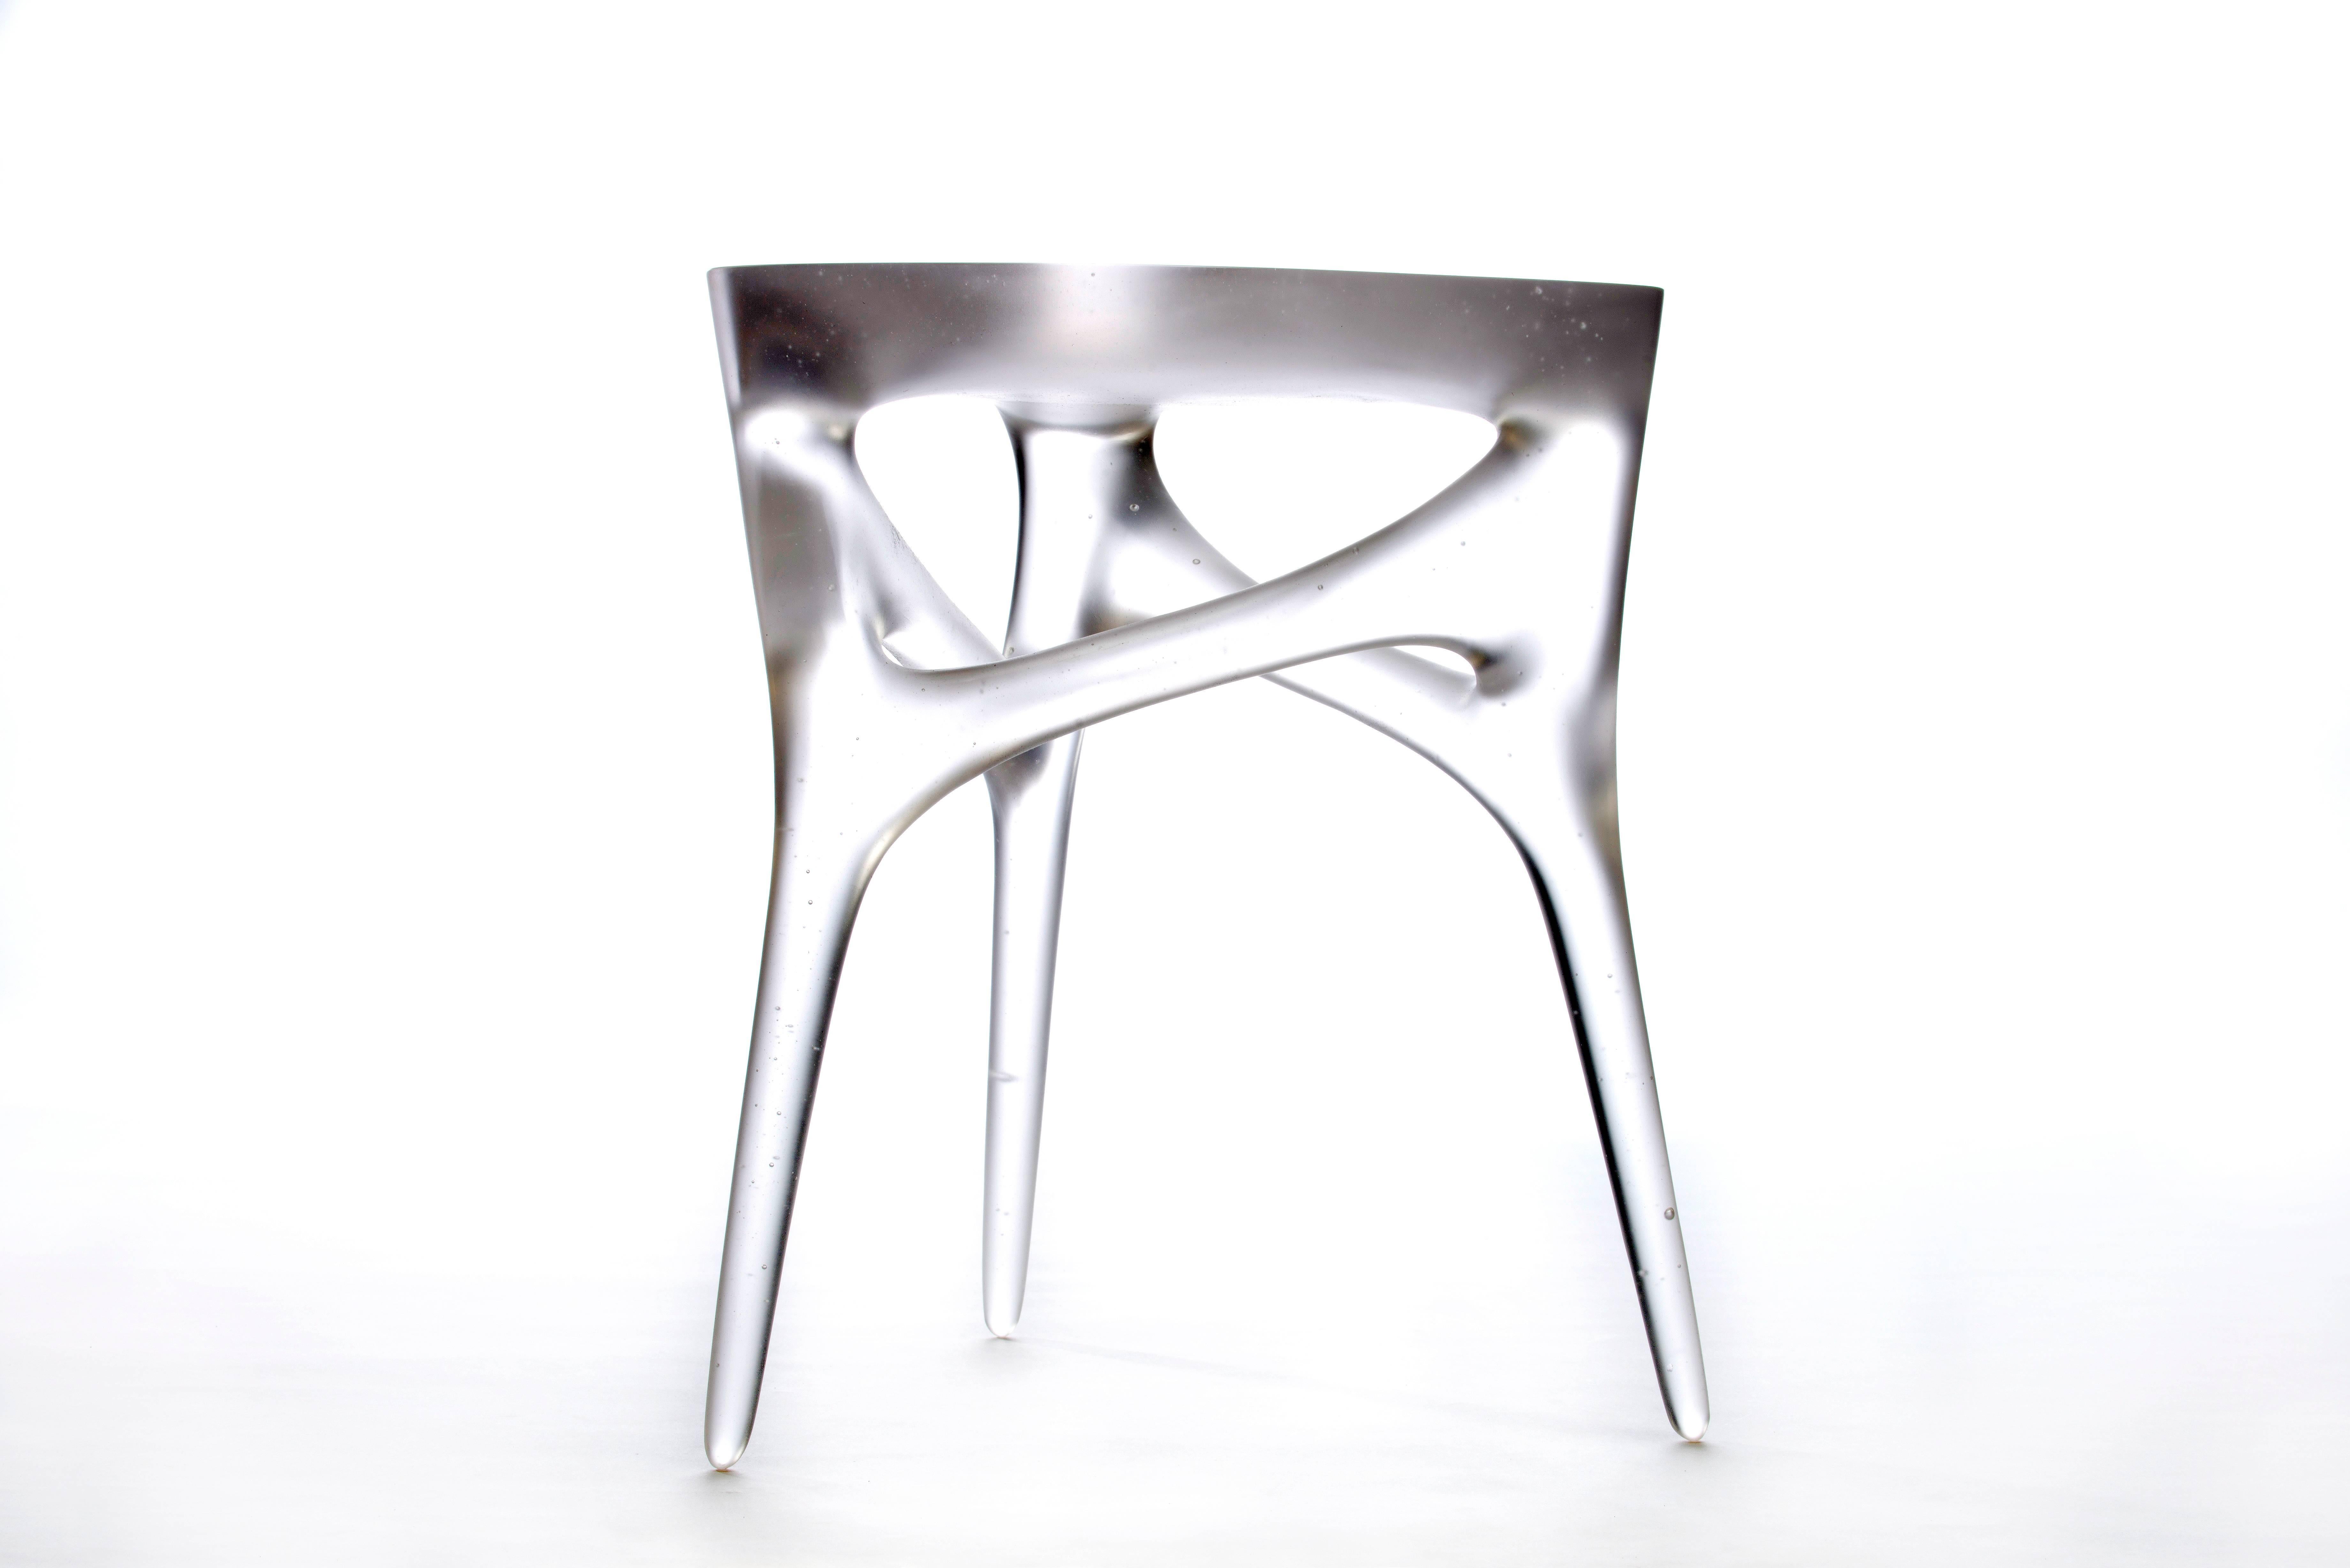 Exquisite cast glass side table by German artist and designer Timothy Schreiber. 

This table is made to order and available in either frosted or clear glass finish.